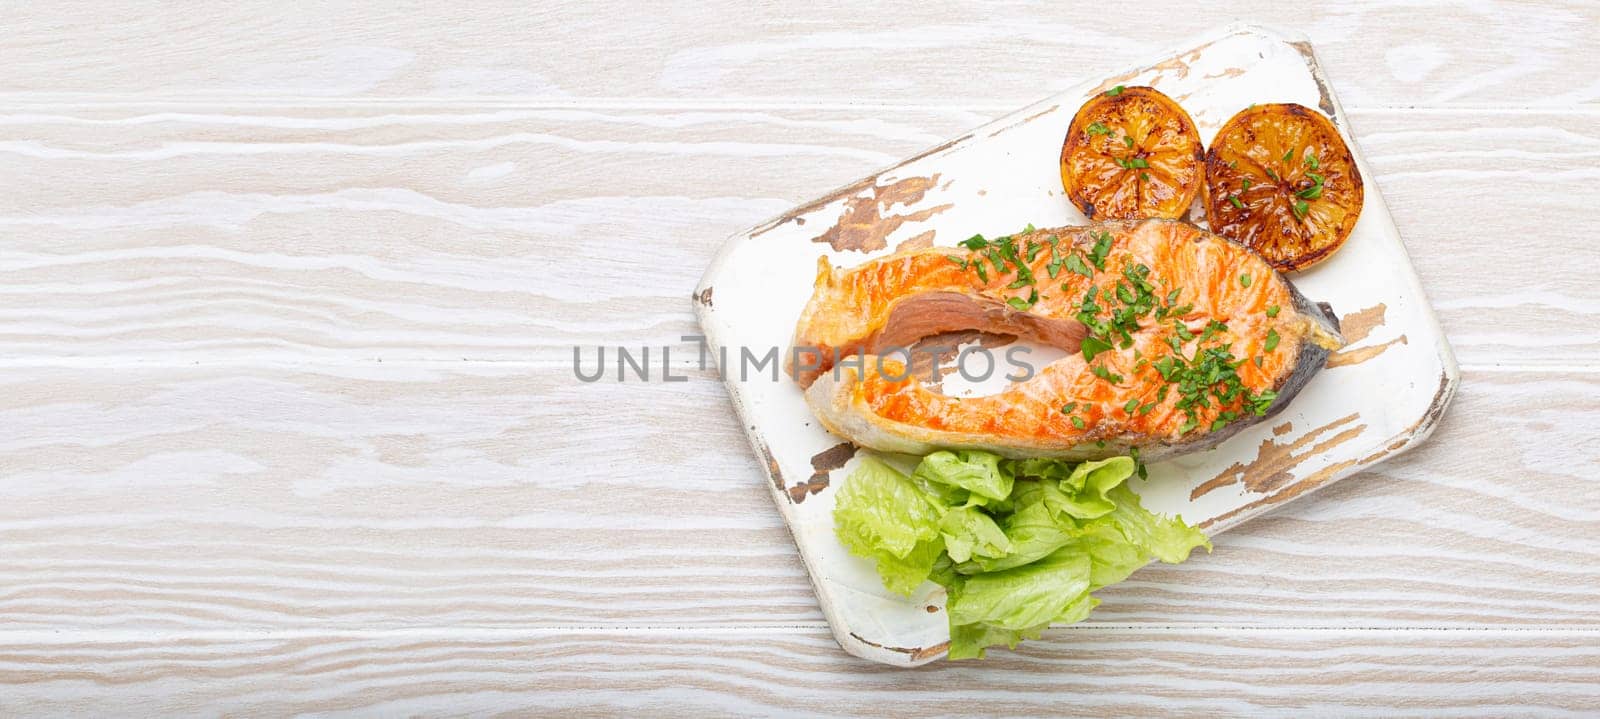 Grilled fish salmon steak and green salad with lemon served on white cutting board rustic wooden background top view, balanced diet or healthy nutrition meal with salmon and veggies, copy space.